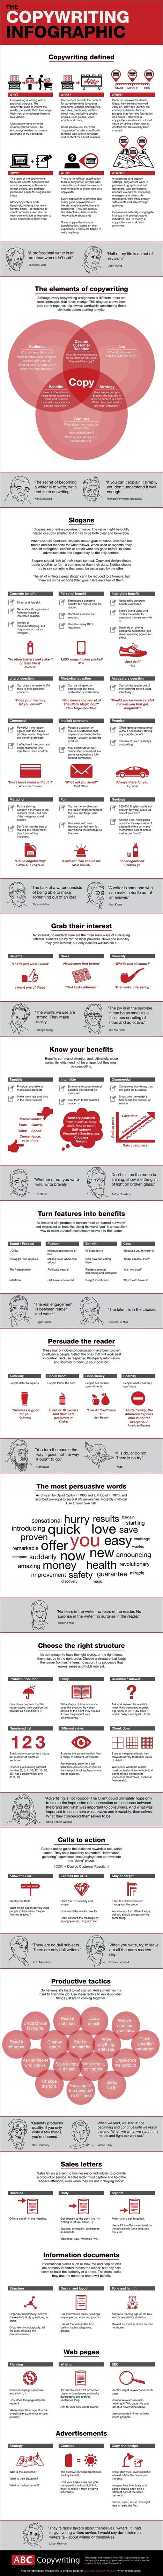 The copywriting infographic | information analyst | Scoop.it